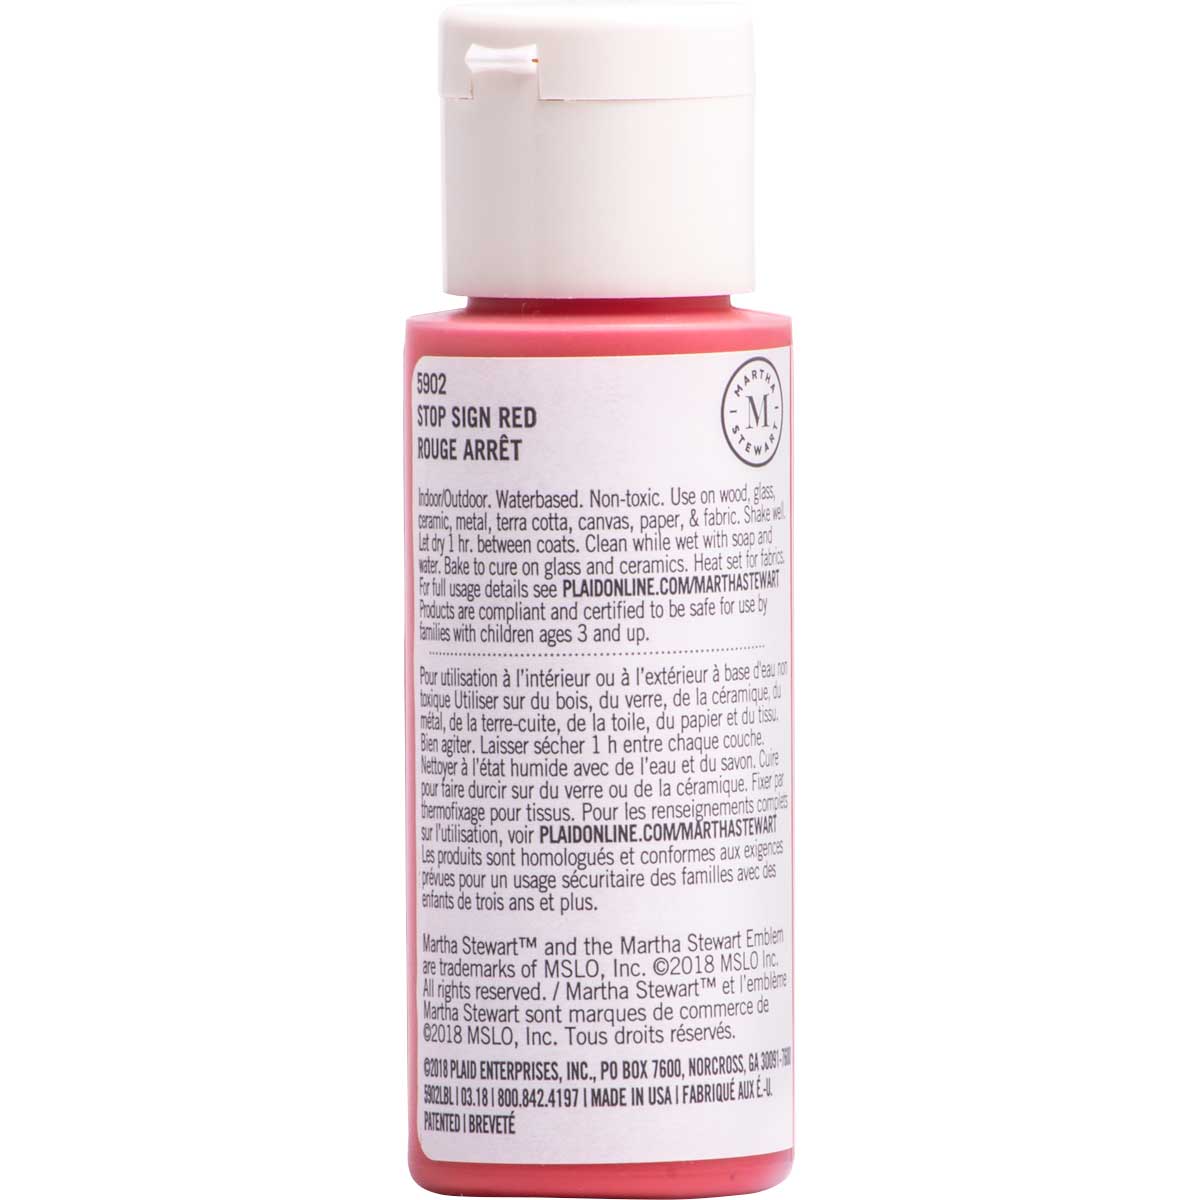 Martha Stewart ® Multi-Surface Satin Acrylic Craft Paint CPSIA - Stop Sign Red, 2 oz. - 5902